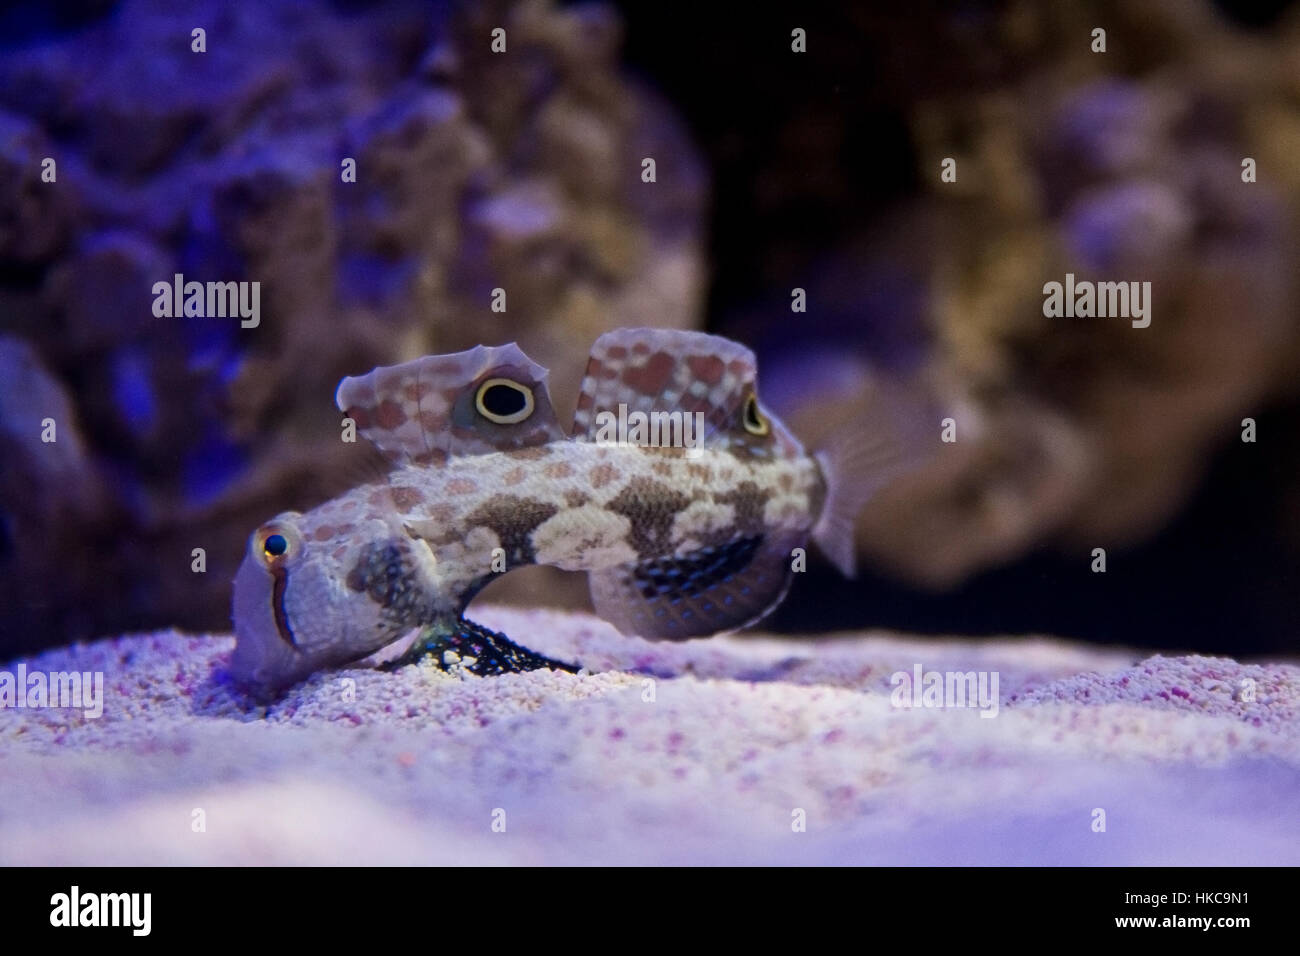 A crab-eyed goby fish feeds on the bottom of an aquarium. Stock Photo